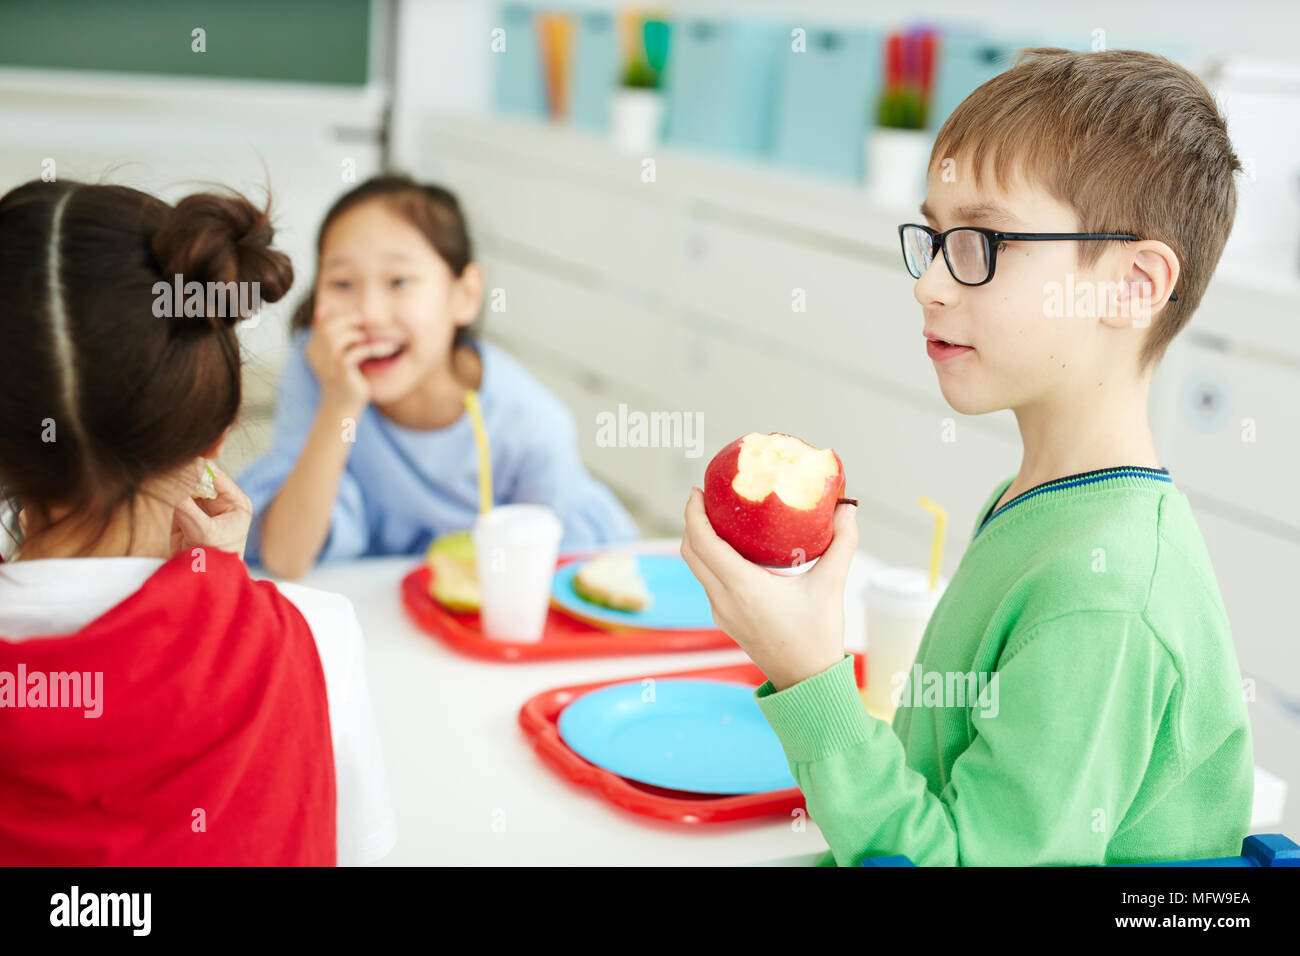 https://c8.alamy.com/comp/MFW9EA/caucasian-boy-in-glasses-eating-apple-while-having-lunch-with-classmates-in-elementary-school-cafeteria-MFW9EA.jpg